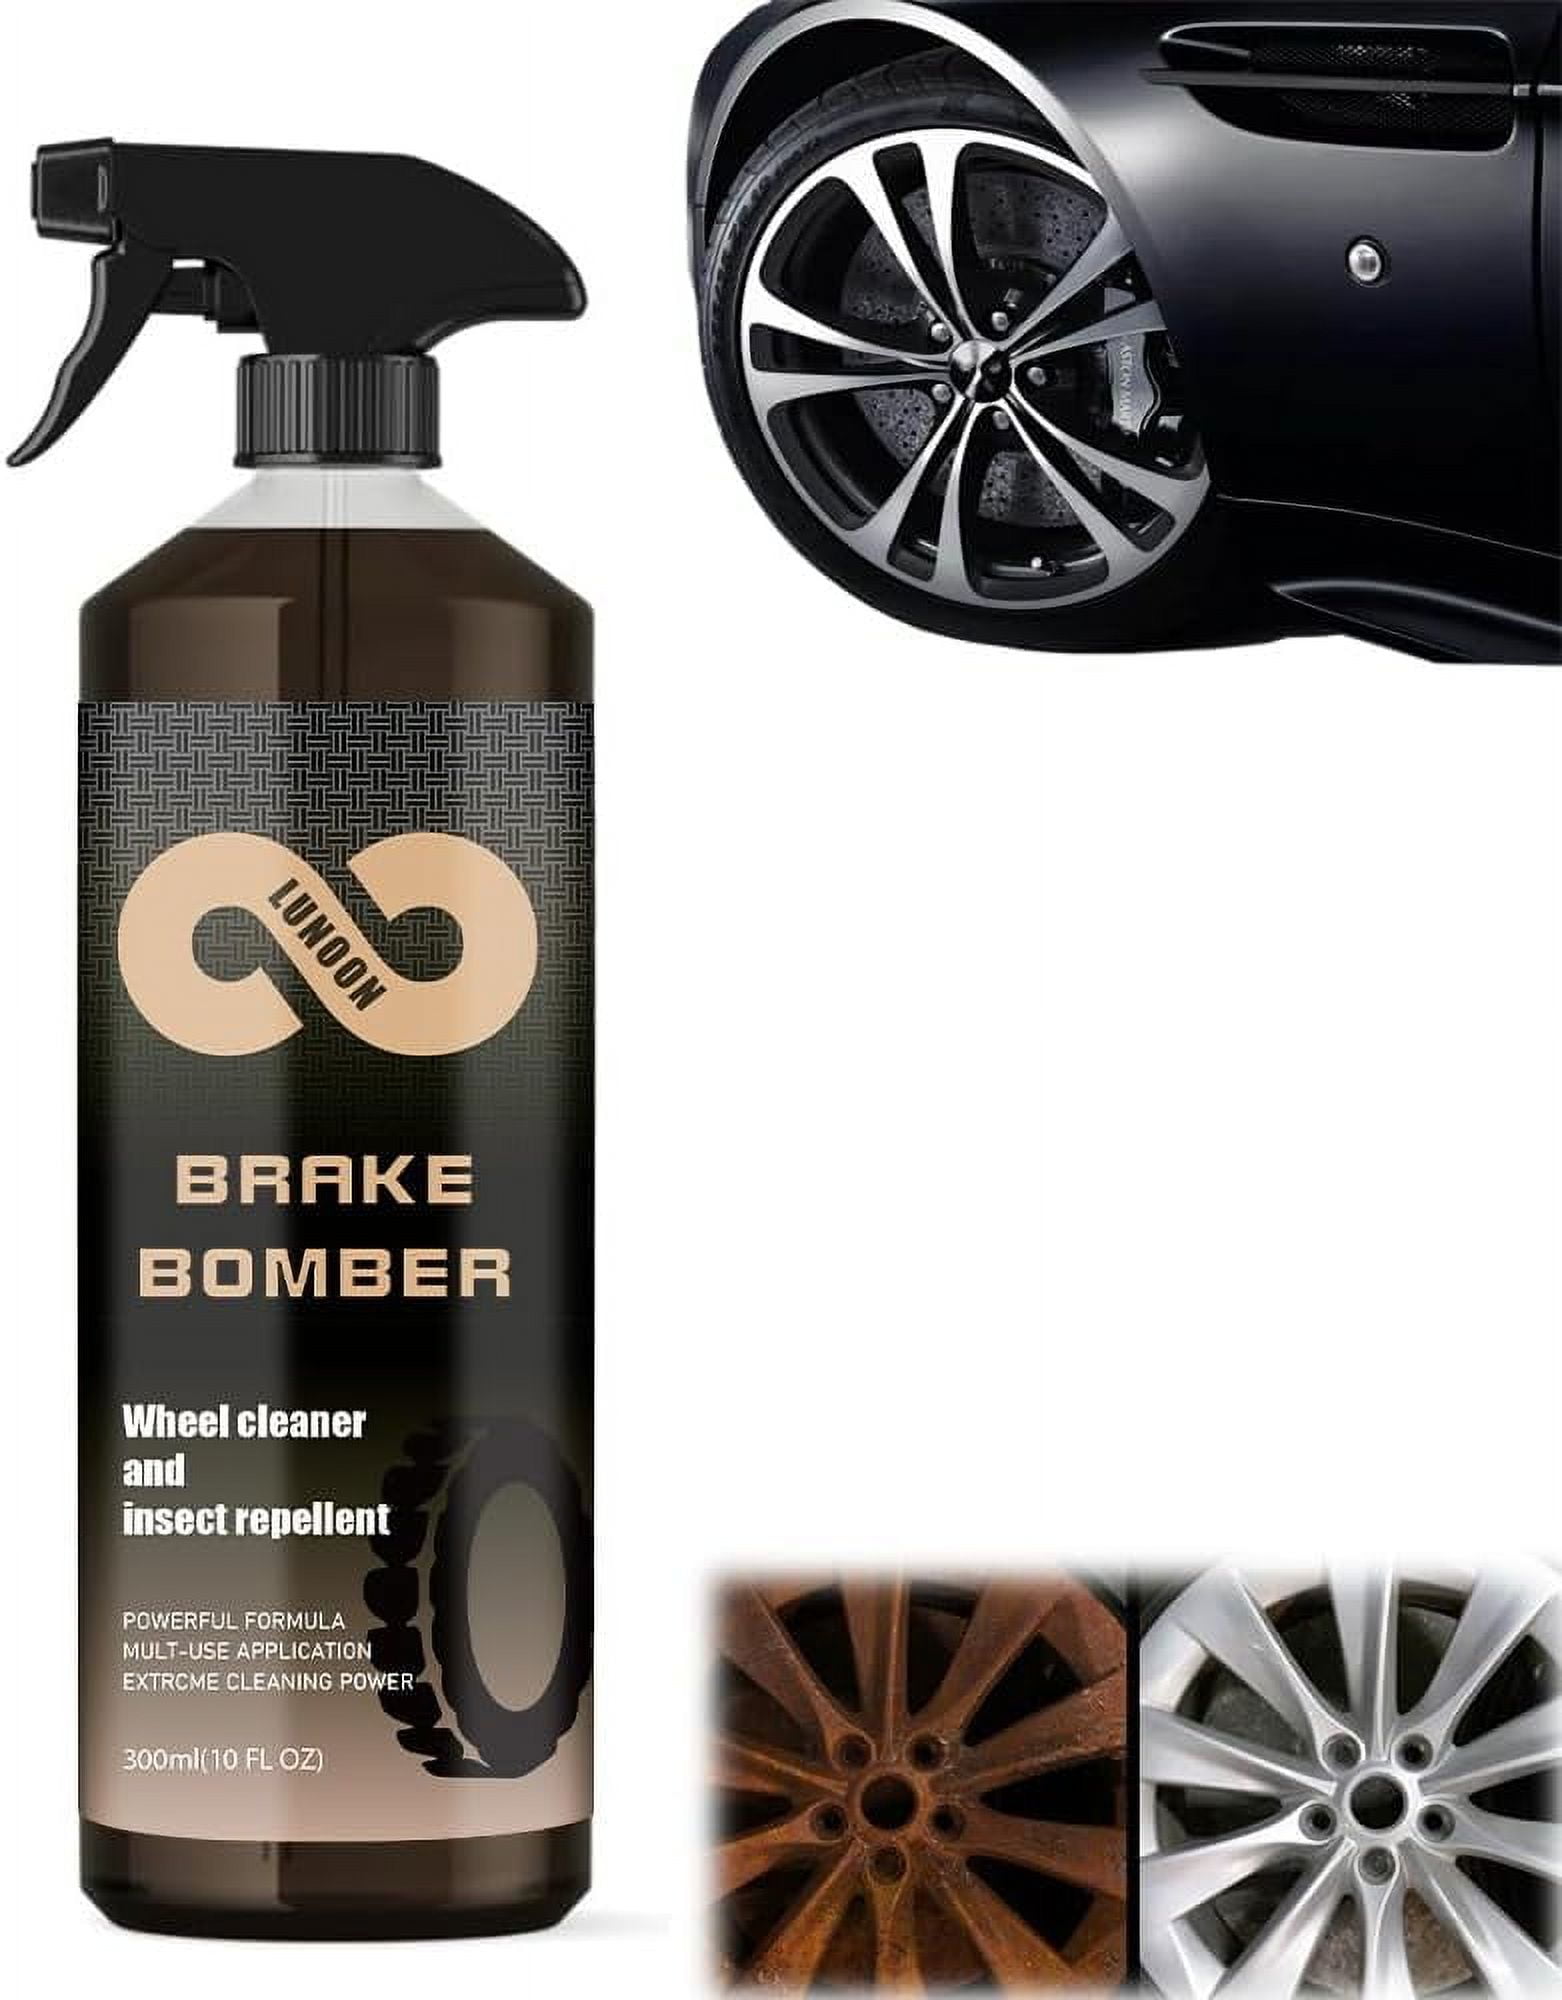 Stealth Garage Brake Bomber: 300ml Non-Acid Wheel Cleaner, Perfect for Cleaning Wheels and Tires, Rim Cleaner & Brake Dust Remover, Safe on Alloy